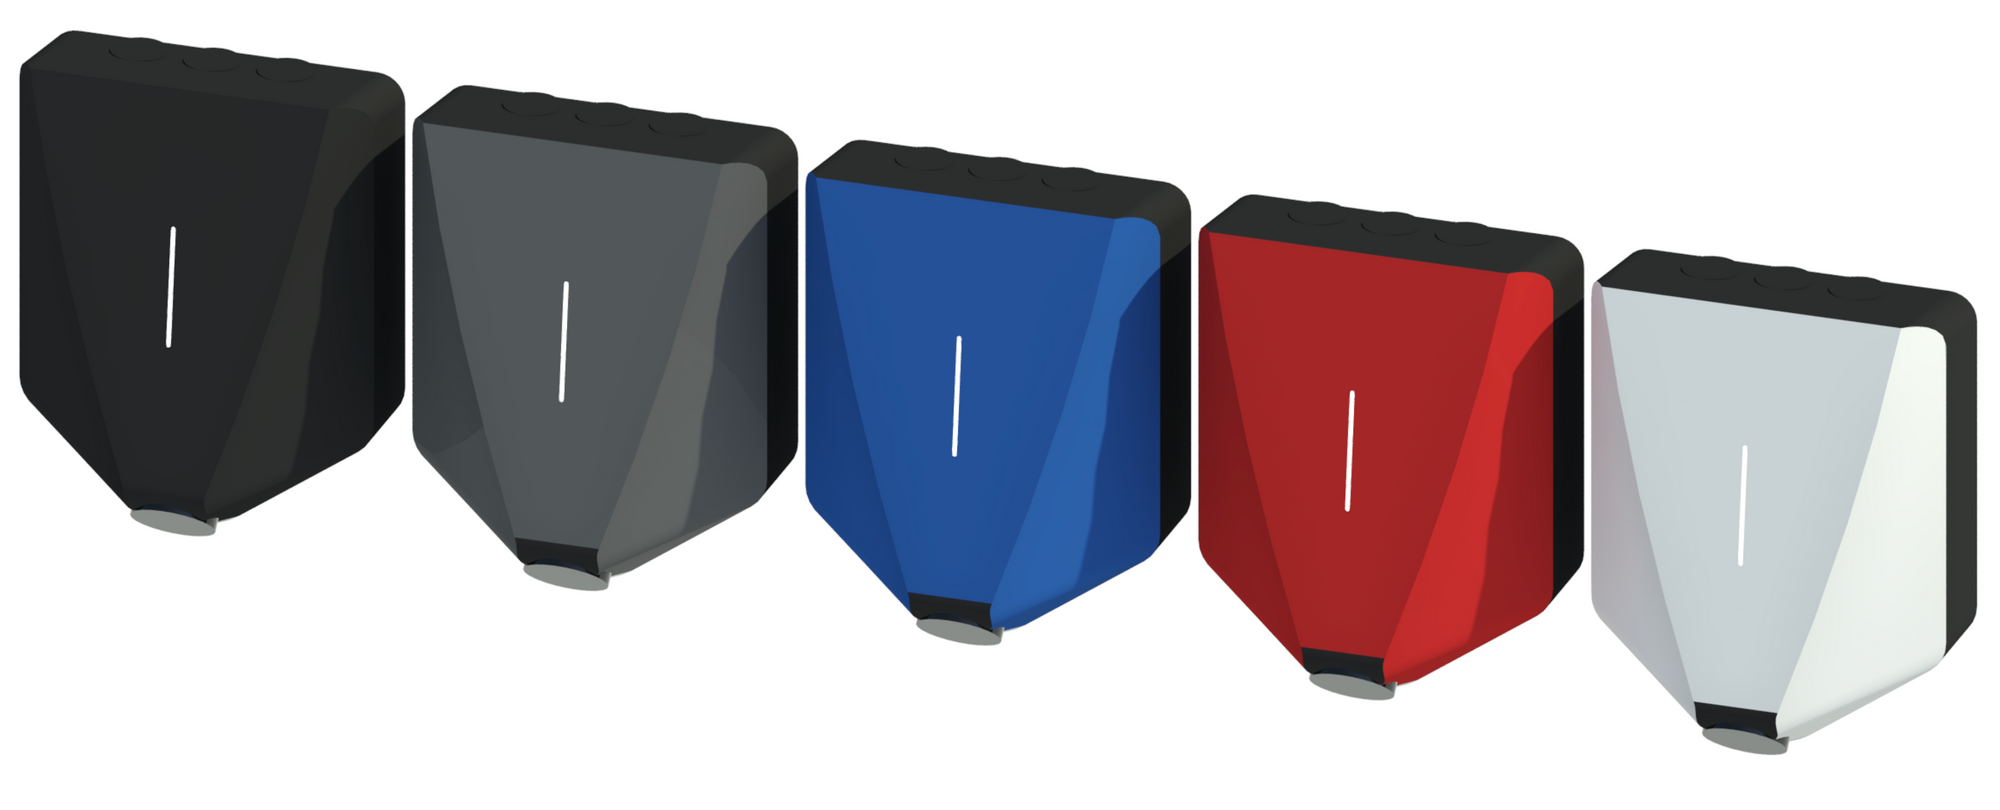 Revit family for the Easee Charge in five colors.